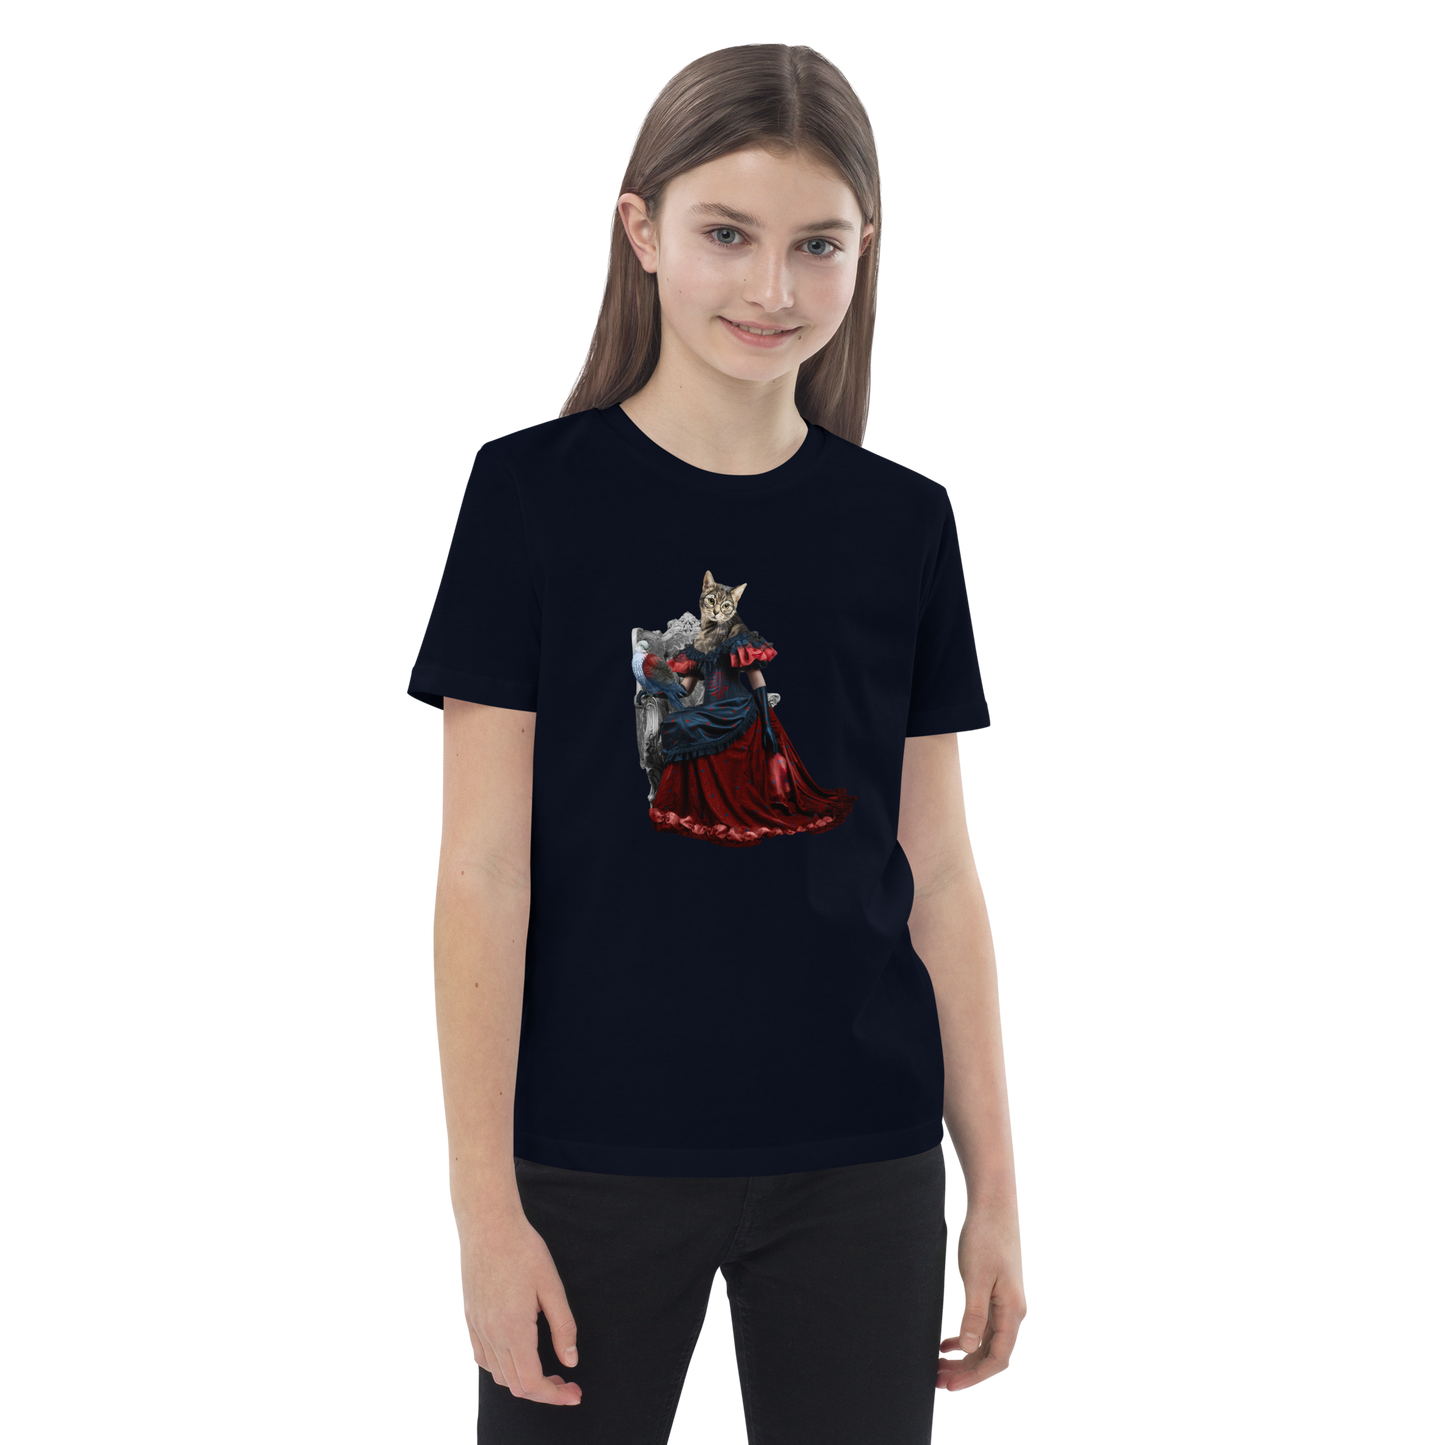 Young girl wearing a French Navy Anthropomorphic Cat Organic Cotton Kids T-Shirt featuring a cute Anthropomorphic Cat graphic on the chest - Kids' Graphic Tees - Funny Animal T-Shirts - Boozy Fox